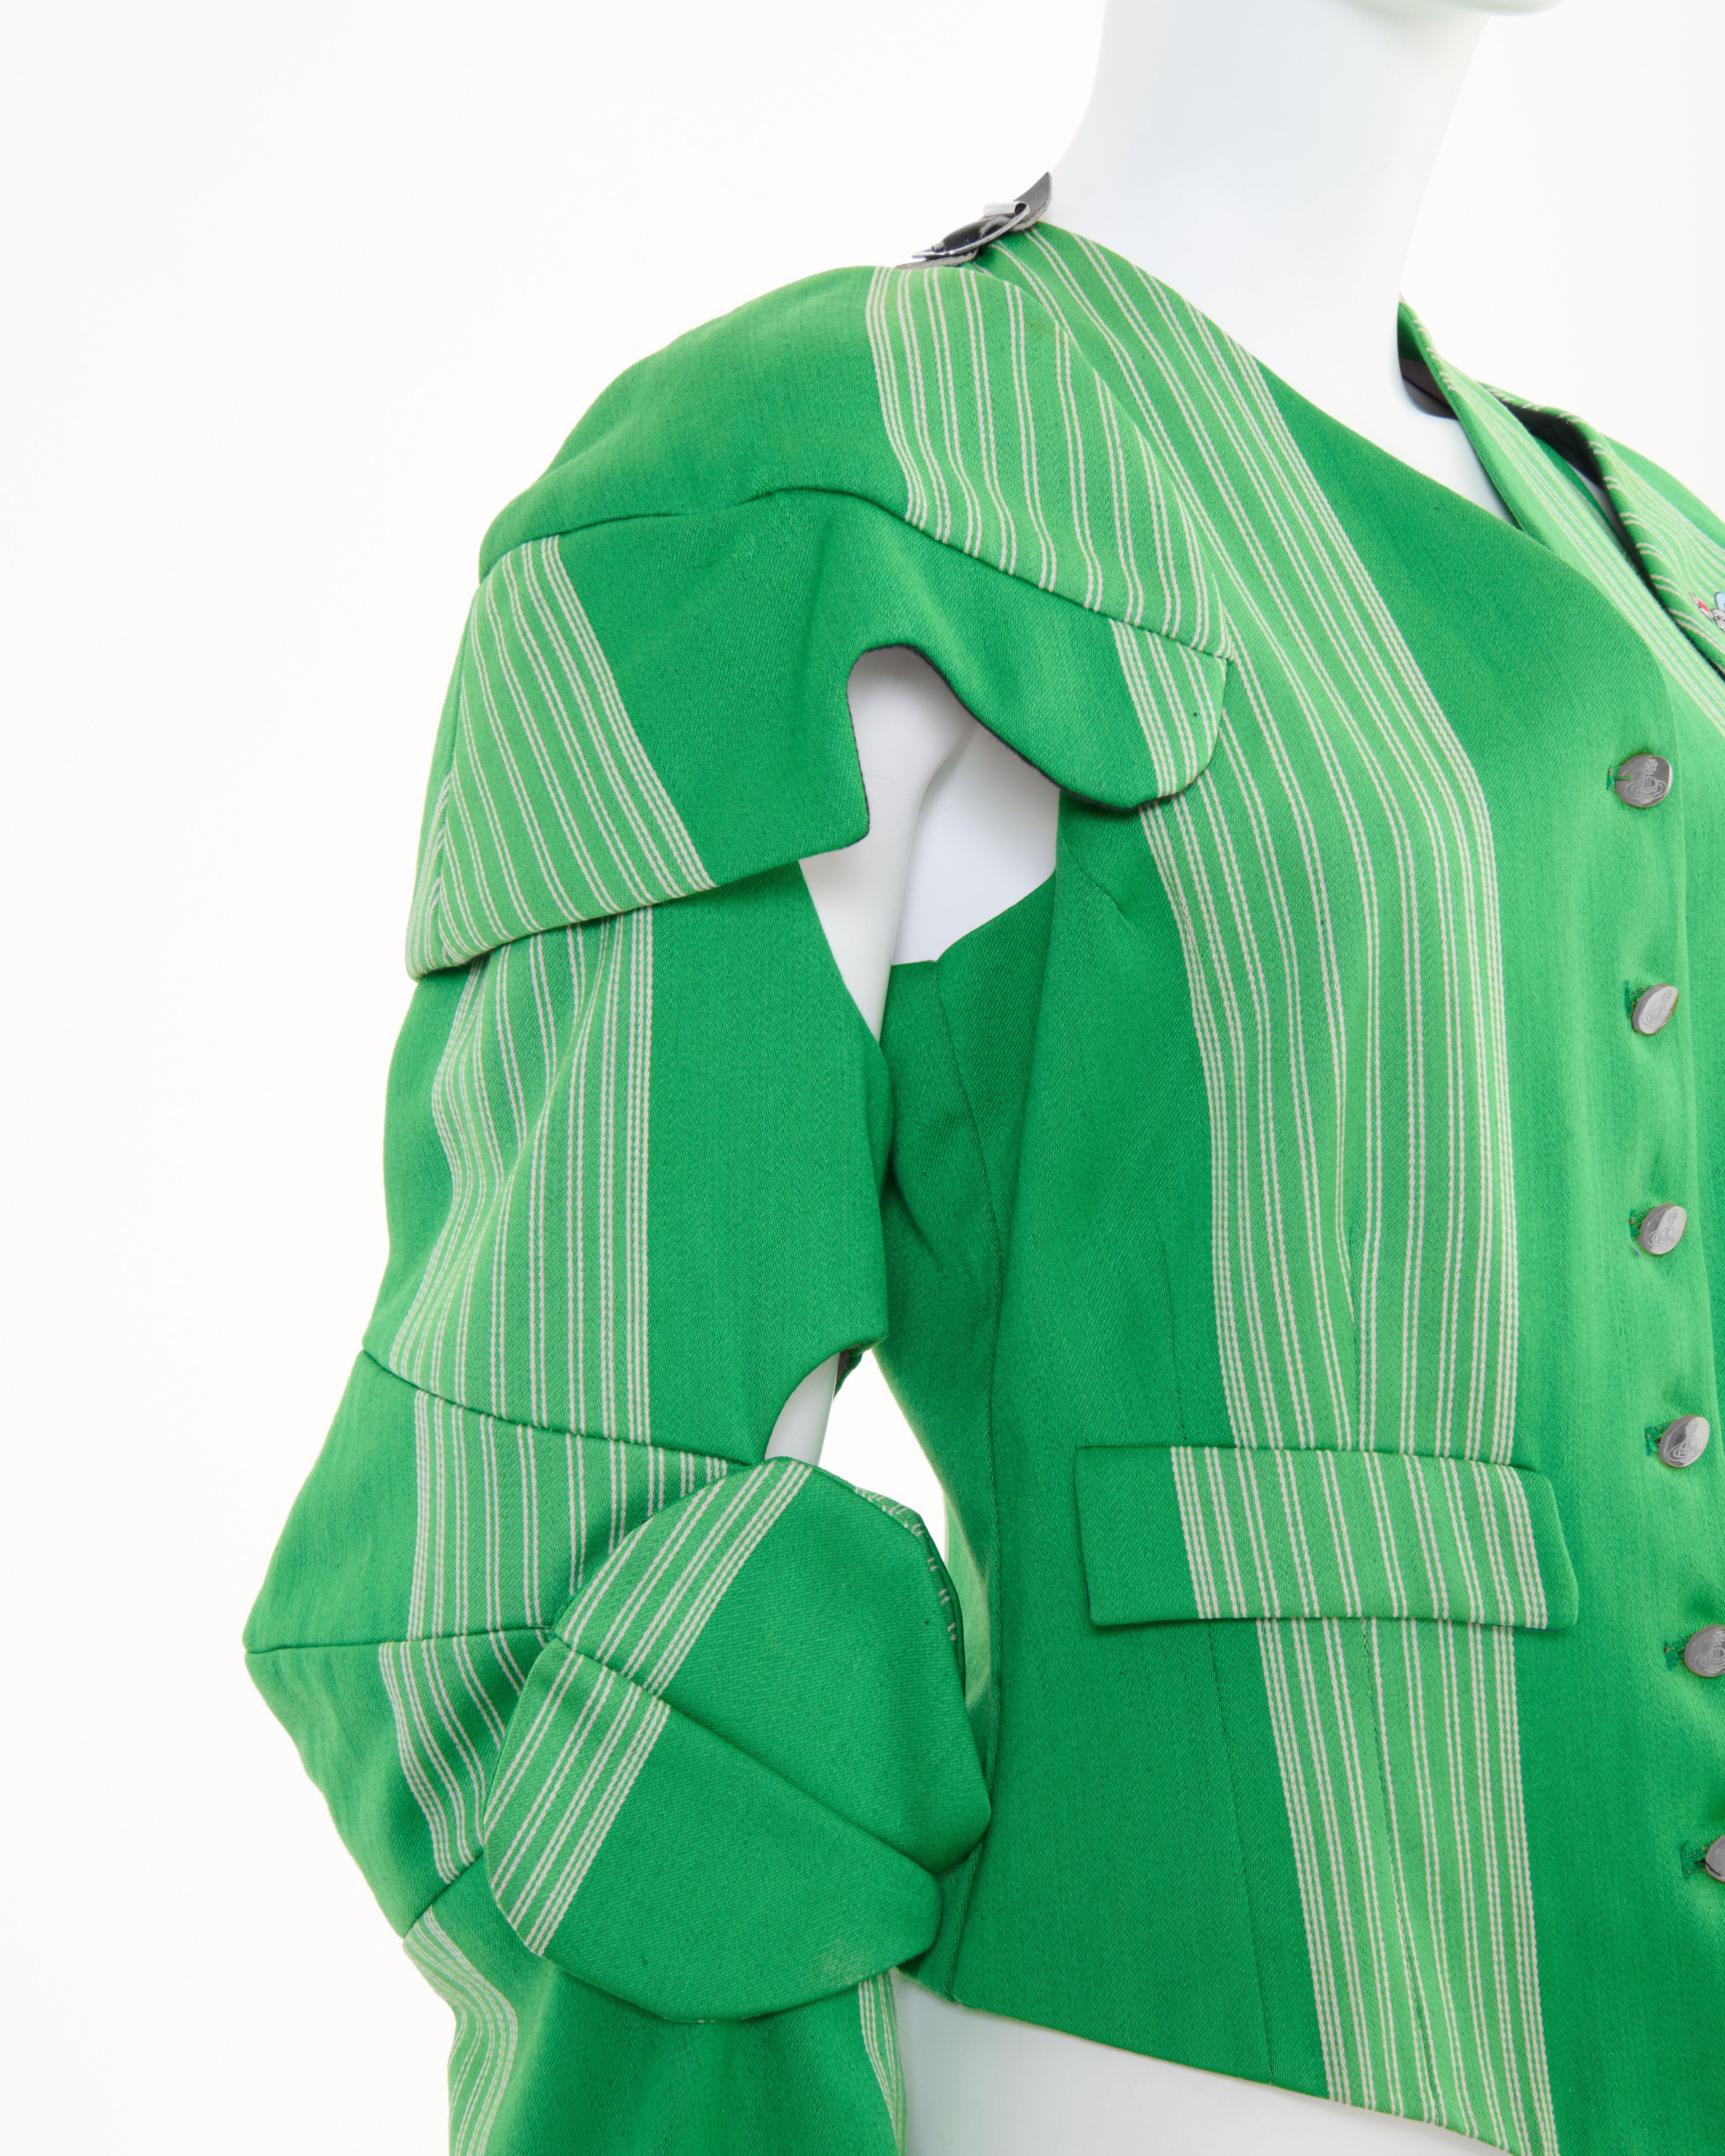 Vivienne Westwood  F/W 1988/89 ‘Time Machine’ Green striped Armour jacket For Sale 8